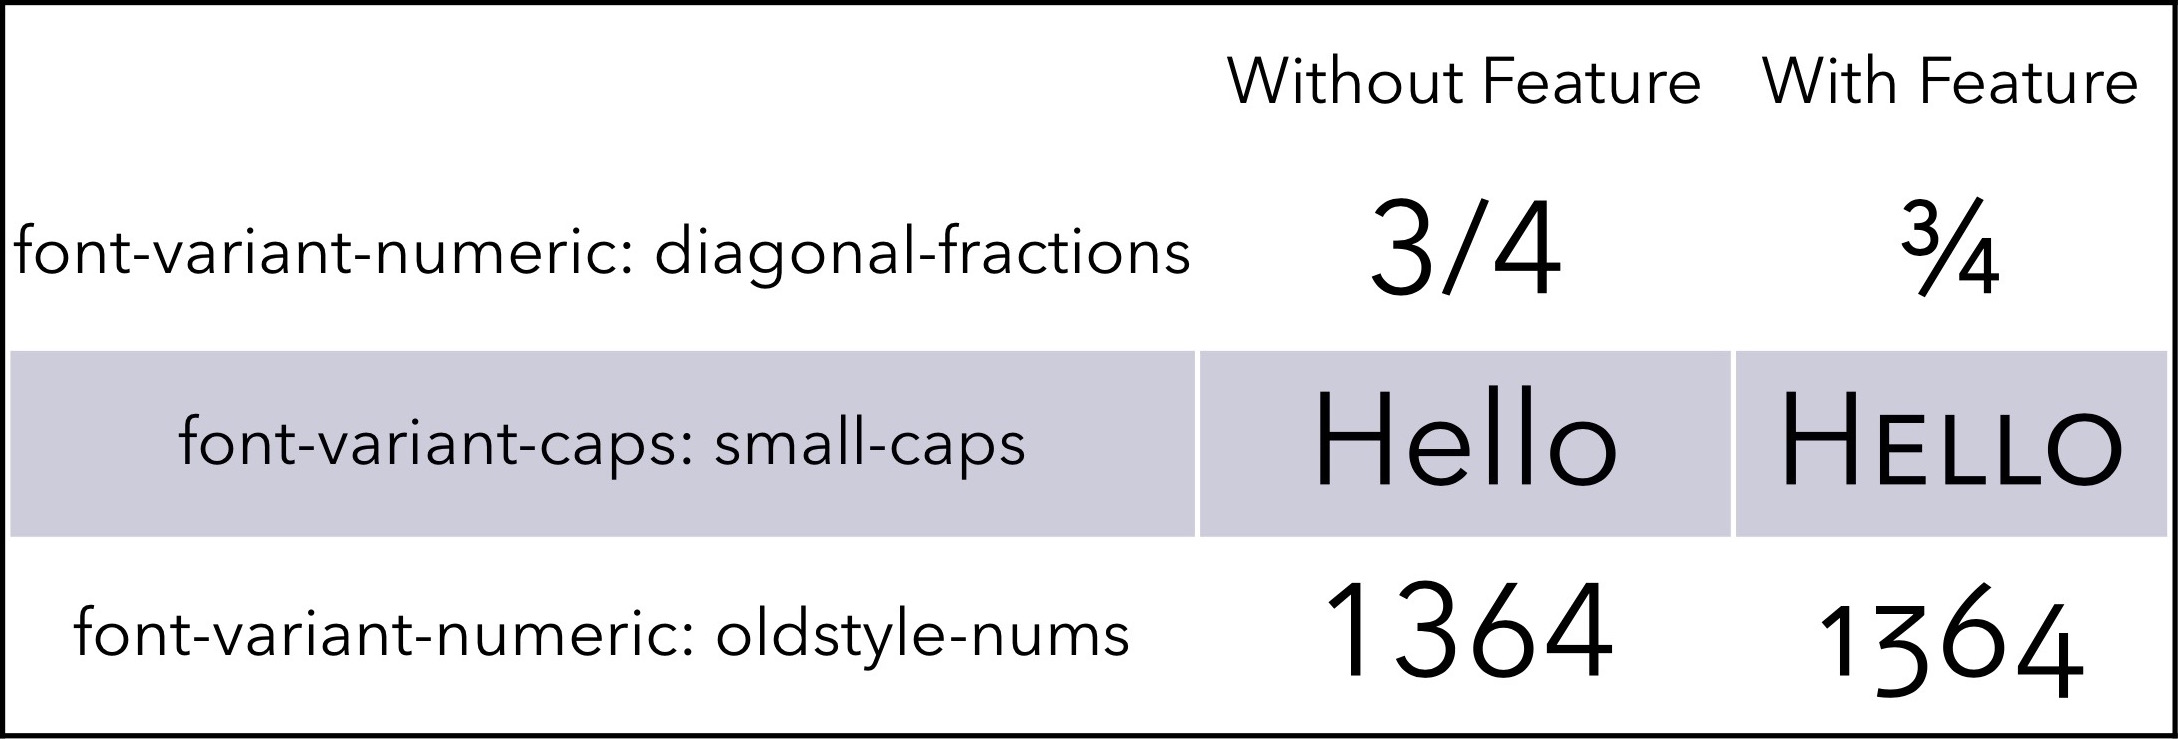 Comparison with and without features font-variant-numeric: diagonal-fractions, font-variant-caps: small-caps, and font-variant-numeric: oldstyle-nums